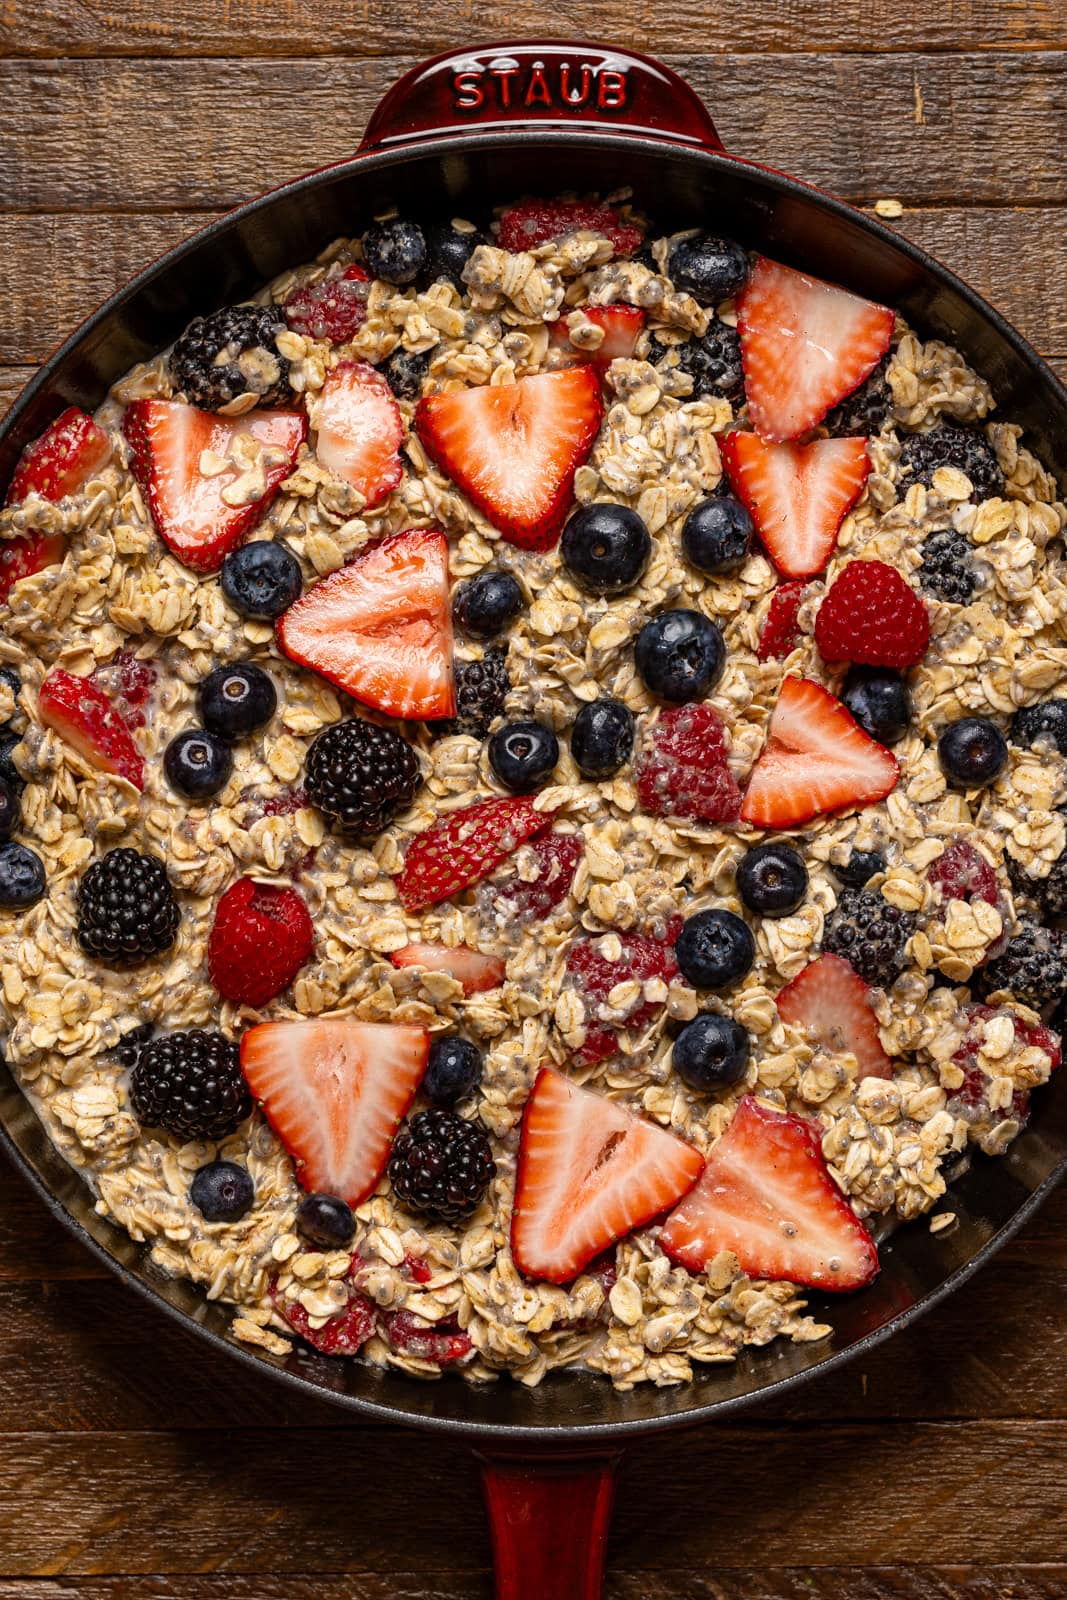 Baked oatmeal ingredients in a burgundy skillet.